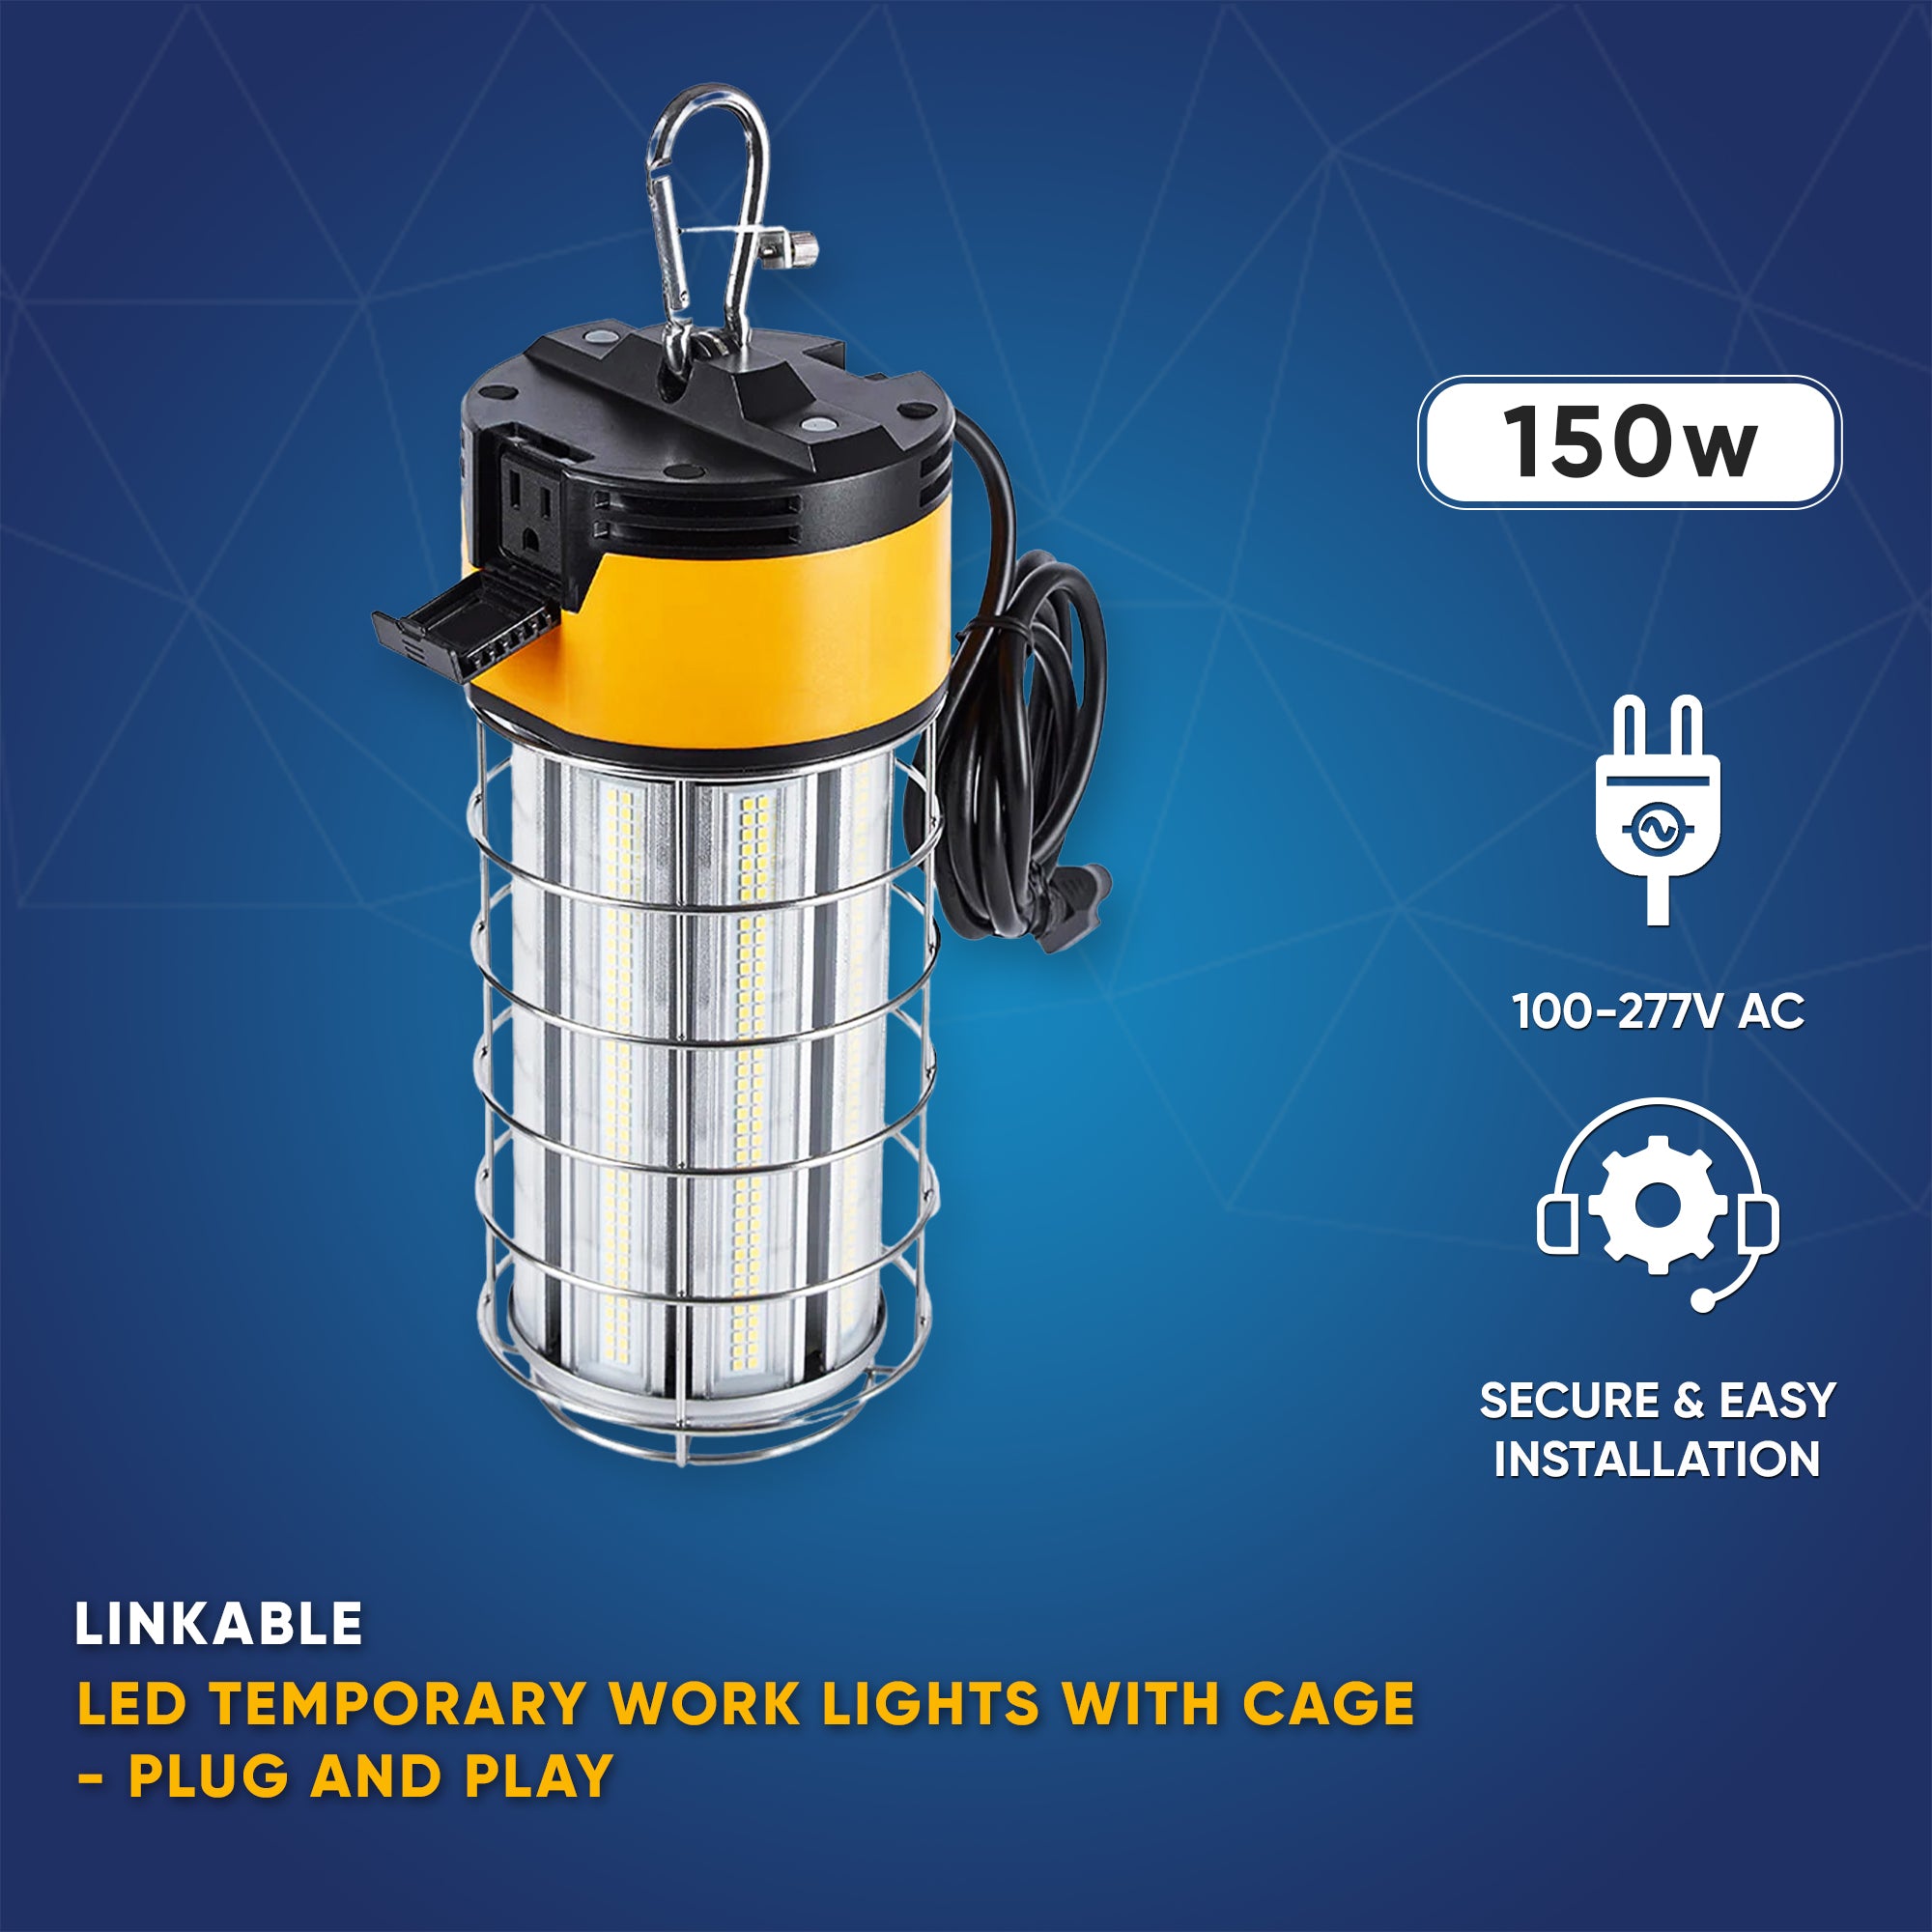 LED Temporary Work Lights with Cage, 150W 5000K 18000LM Plug and Play, Linkable, Jobsite Lighting, IP64, Portable Hanging Work Construction Light